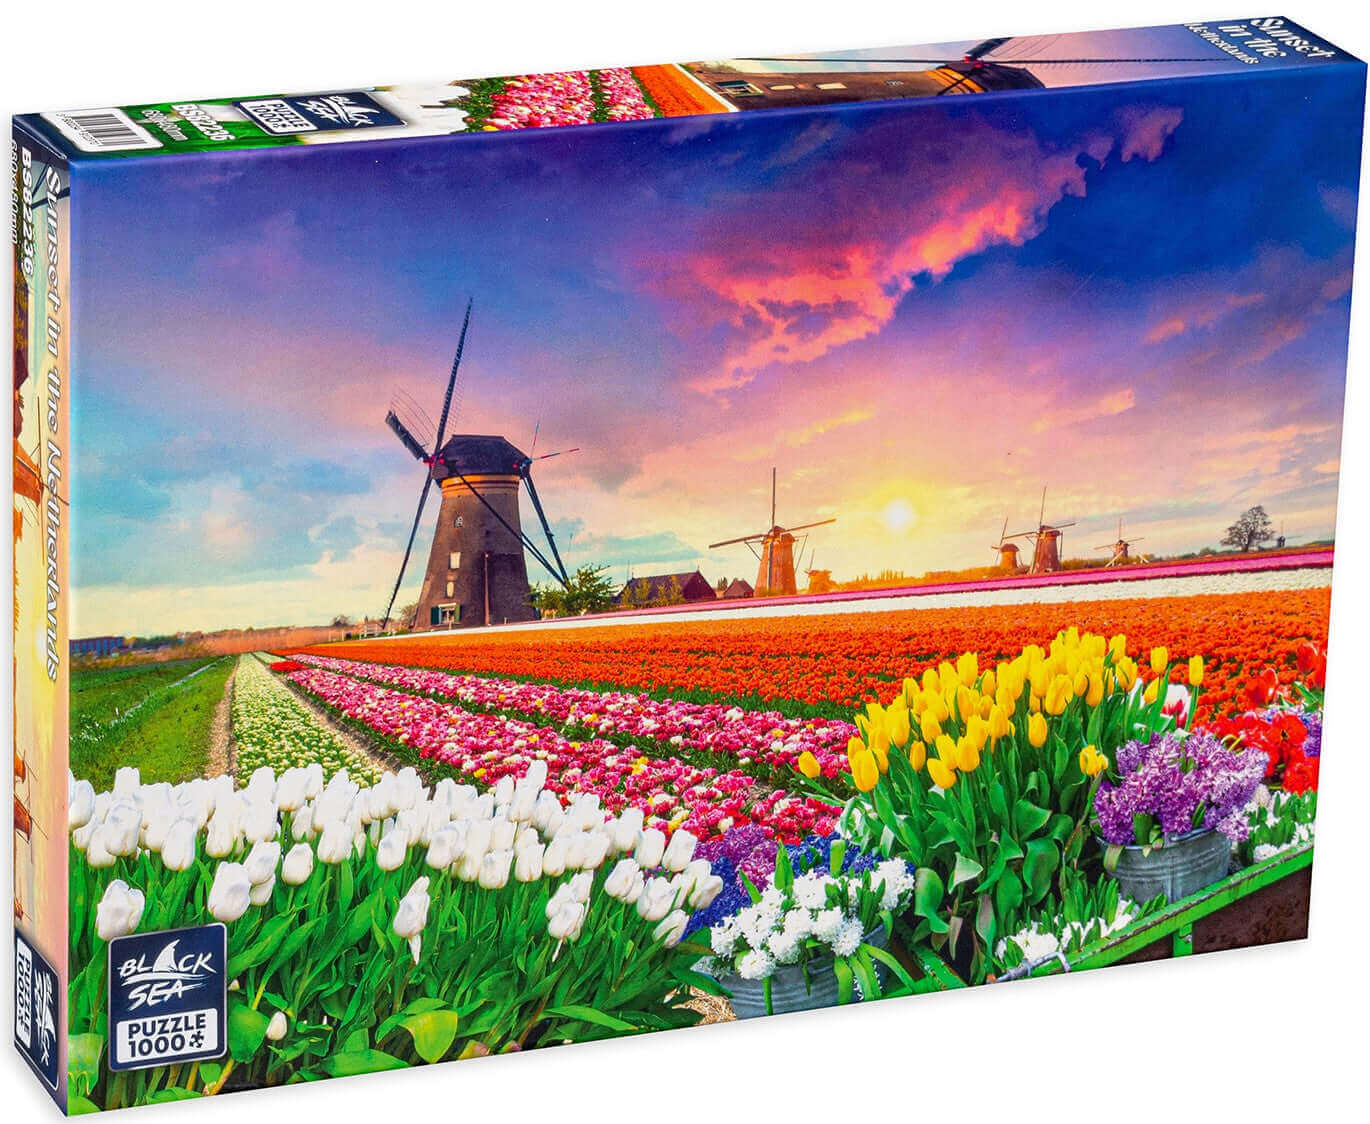 Puzzle Black Sea 1000 pieces - Sunset in the Netherlands